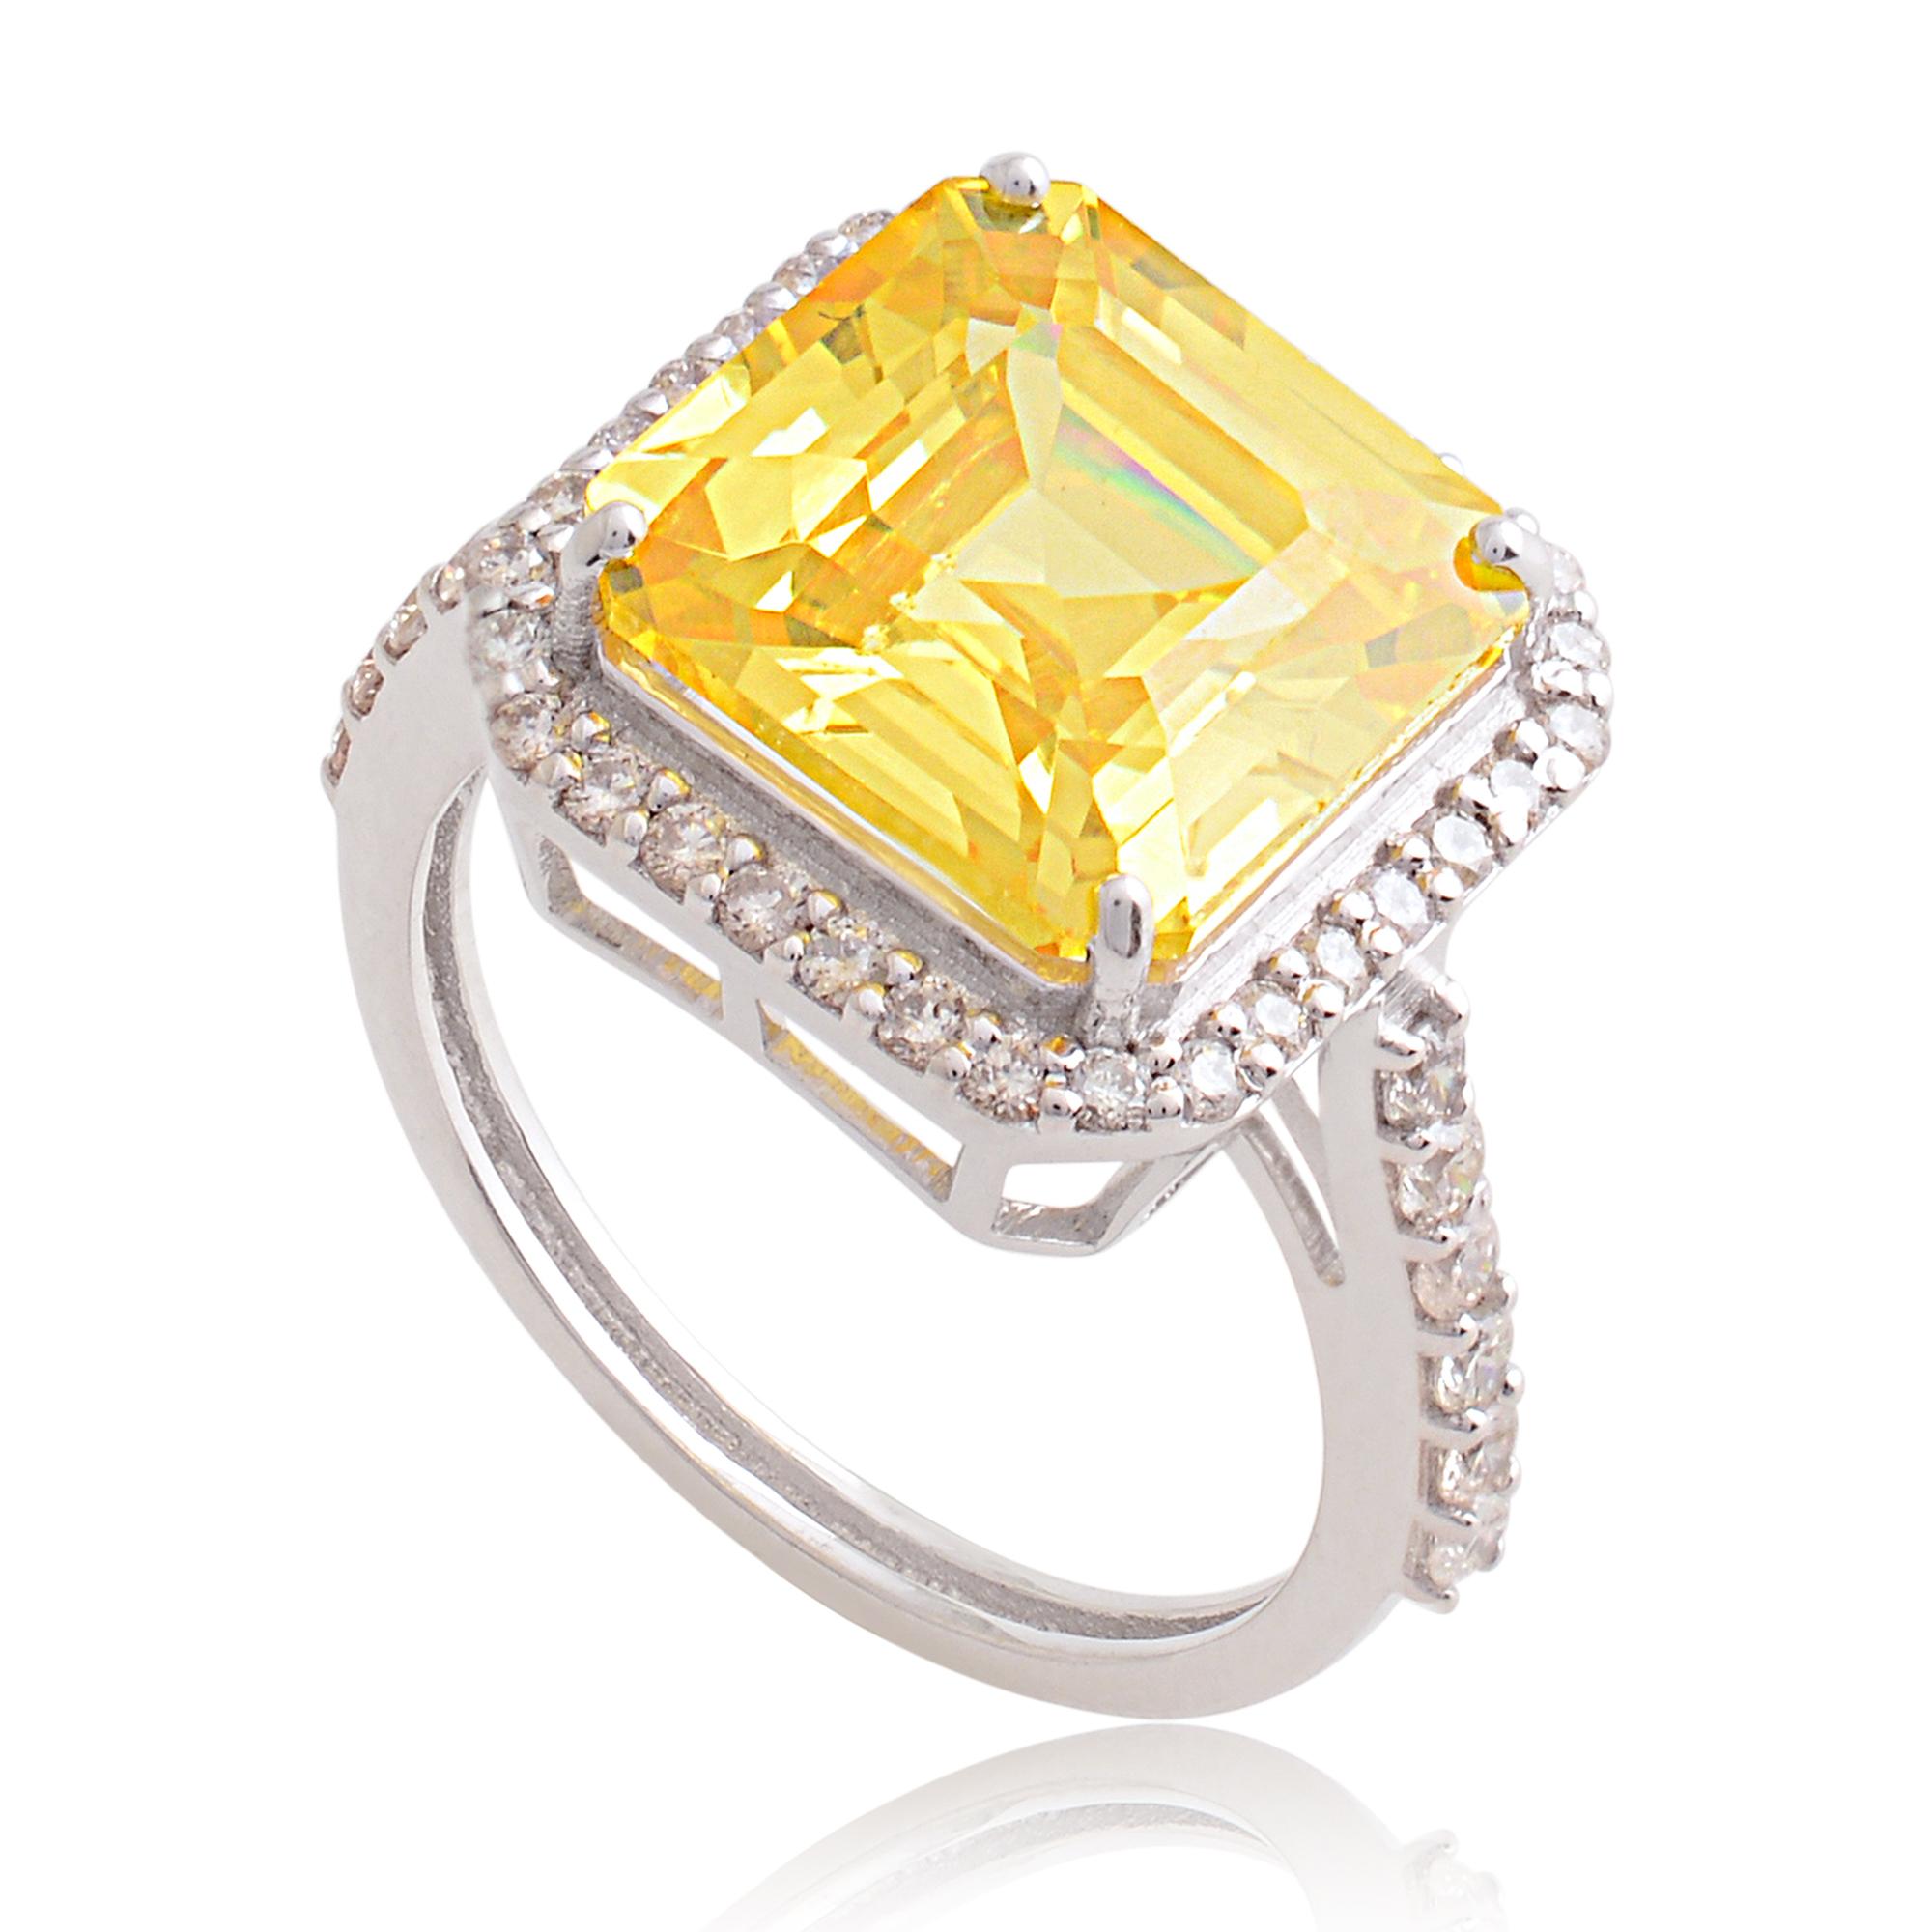 For Sale:  Yellow Processed Gemstone Cocktail Ring Diamond Pave 18k White Gold Fine Jewelry 2